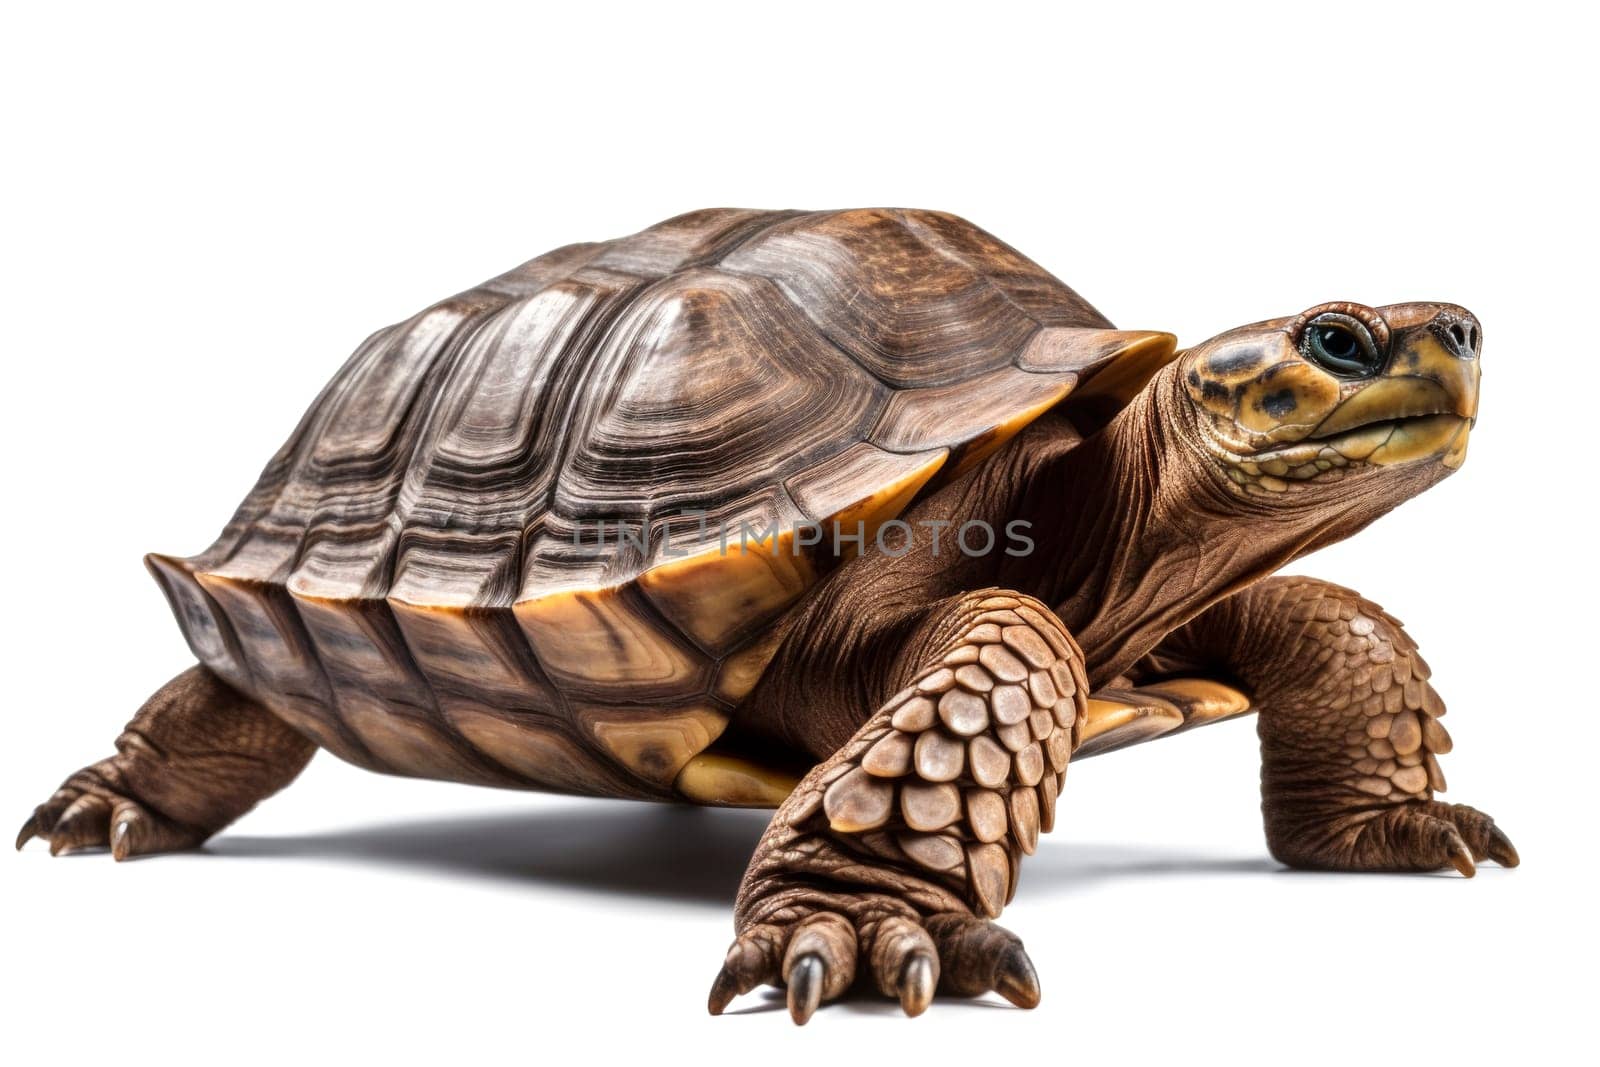 Sulcata tortoise on a white background. Close-up studio portrait. Wildlife and exotic pets concept. Design for educational material, poster, book illustration